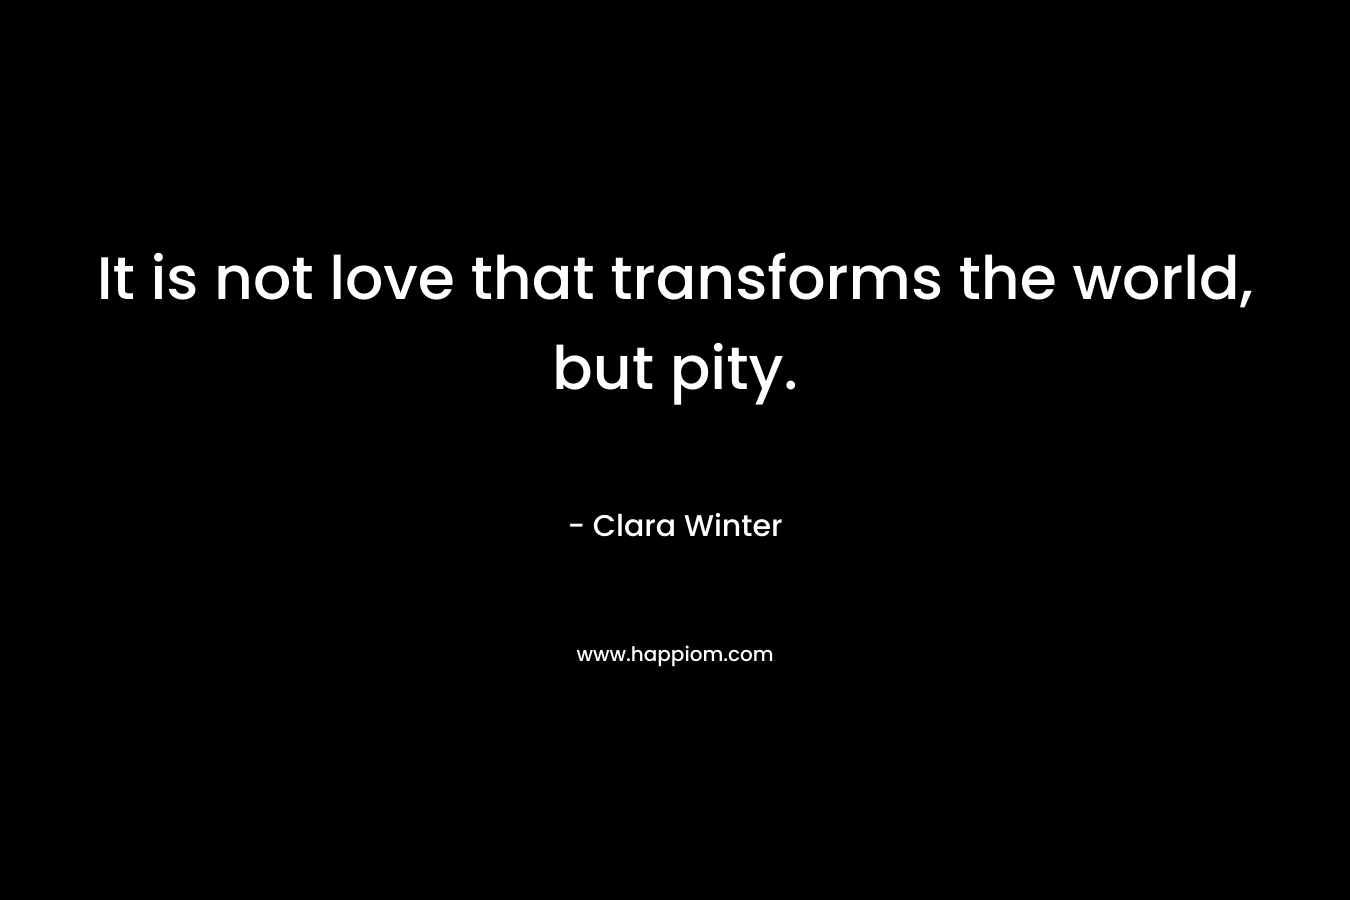 It is not love that transforms the world, but pity.